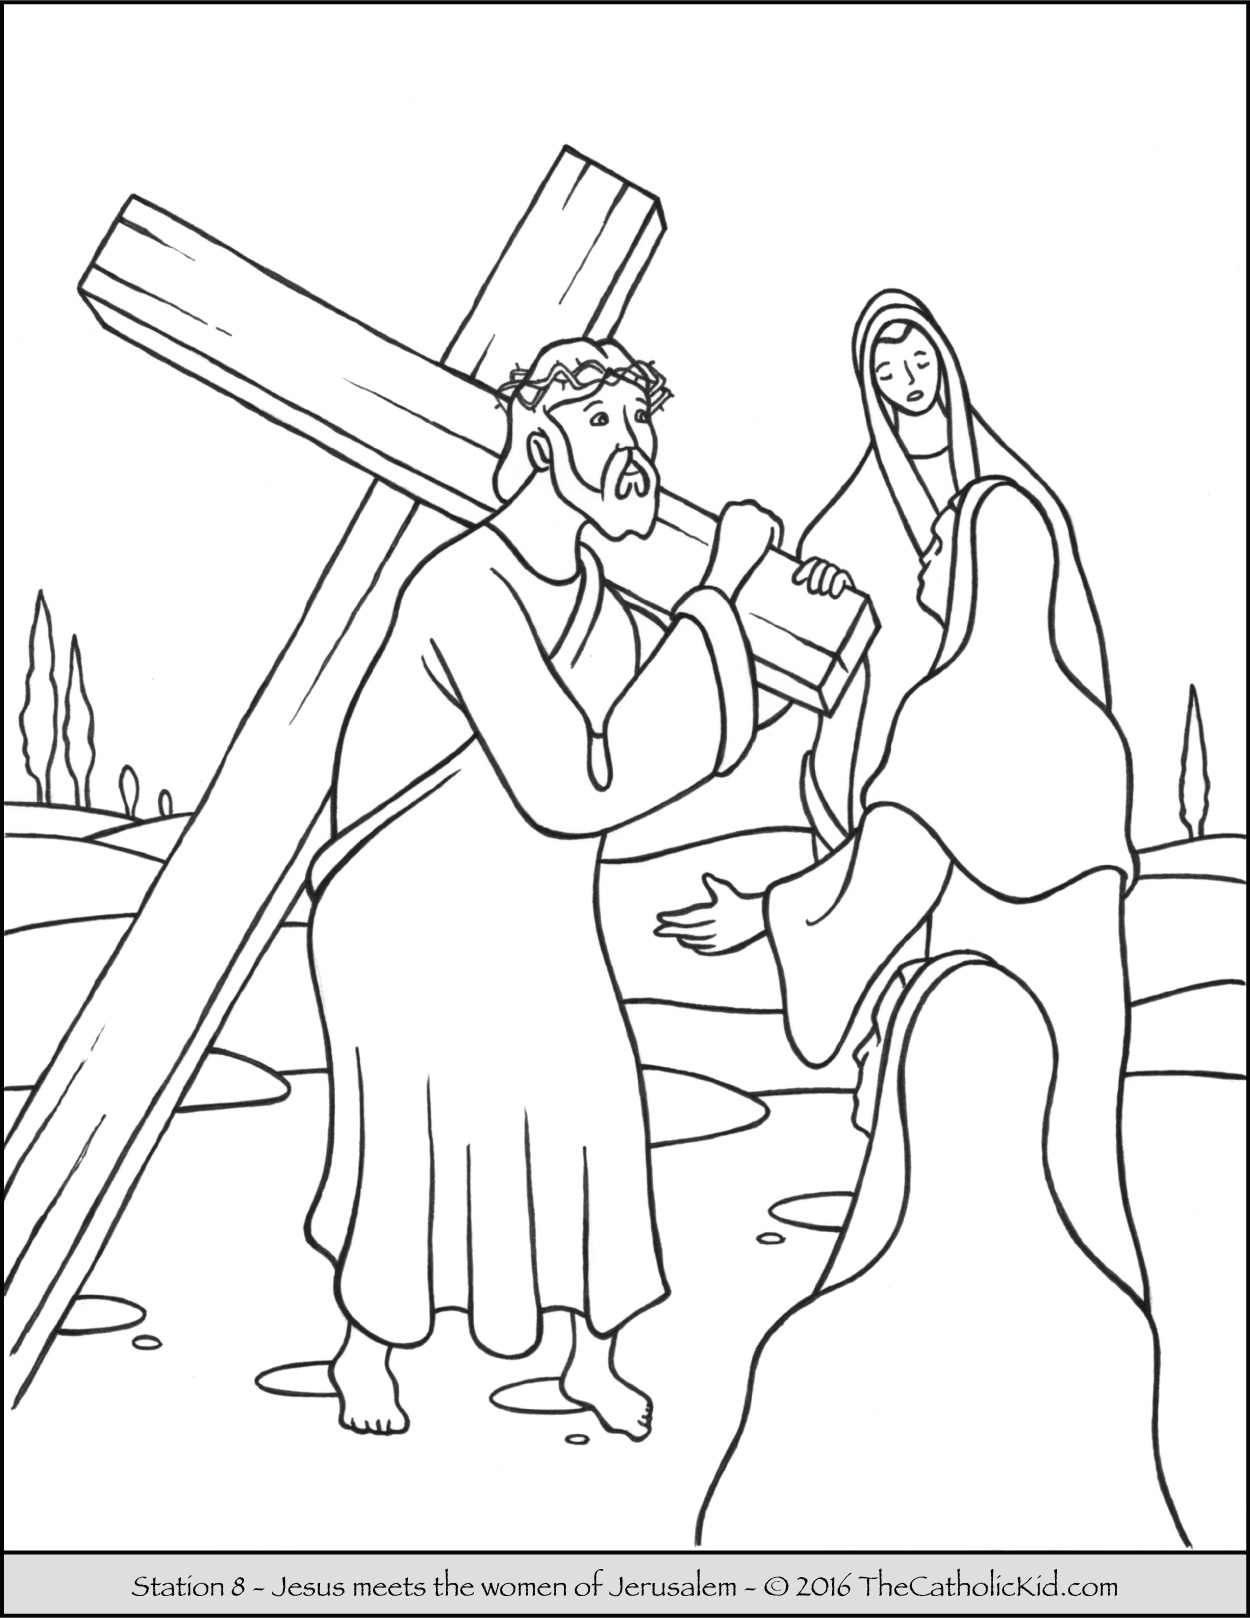 Stations of the Cross Coloring Pages - The Catholic Kid